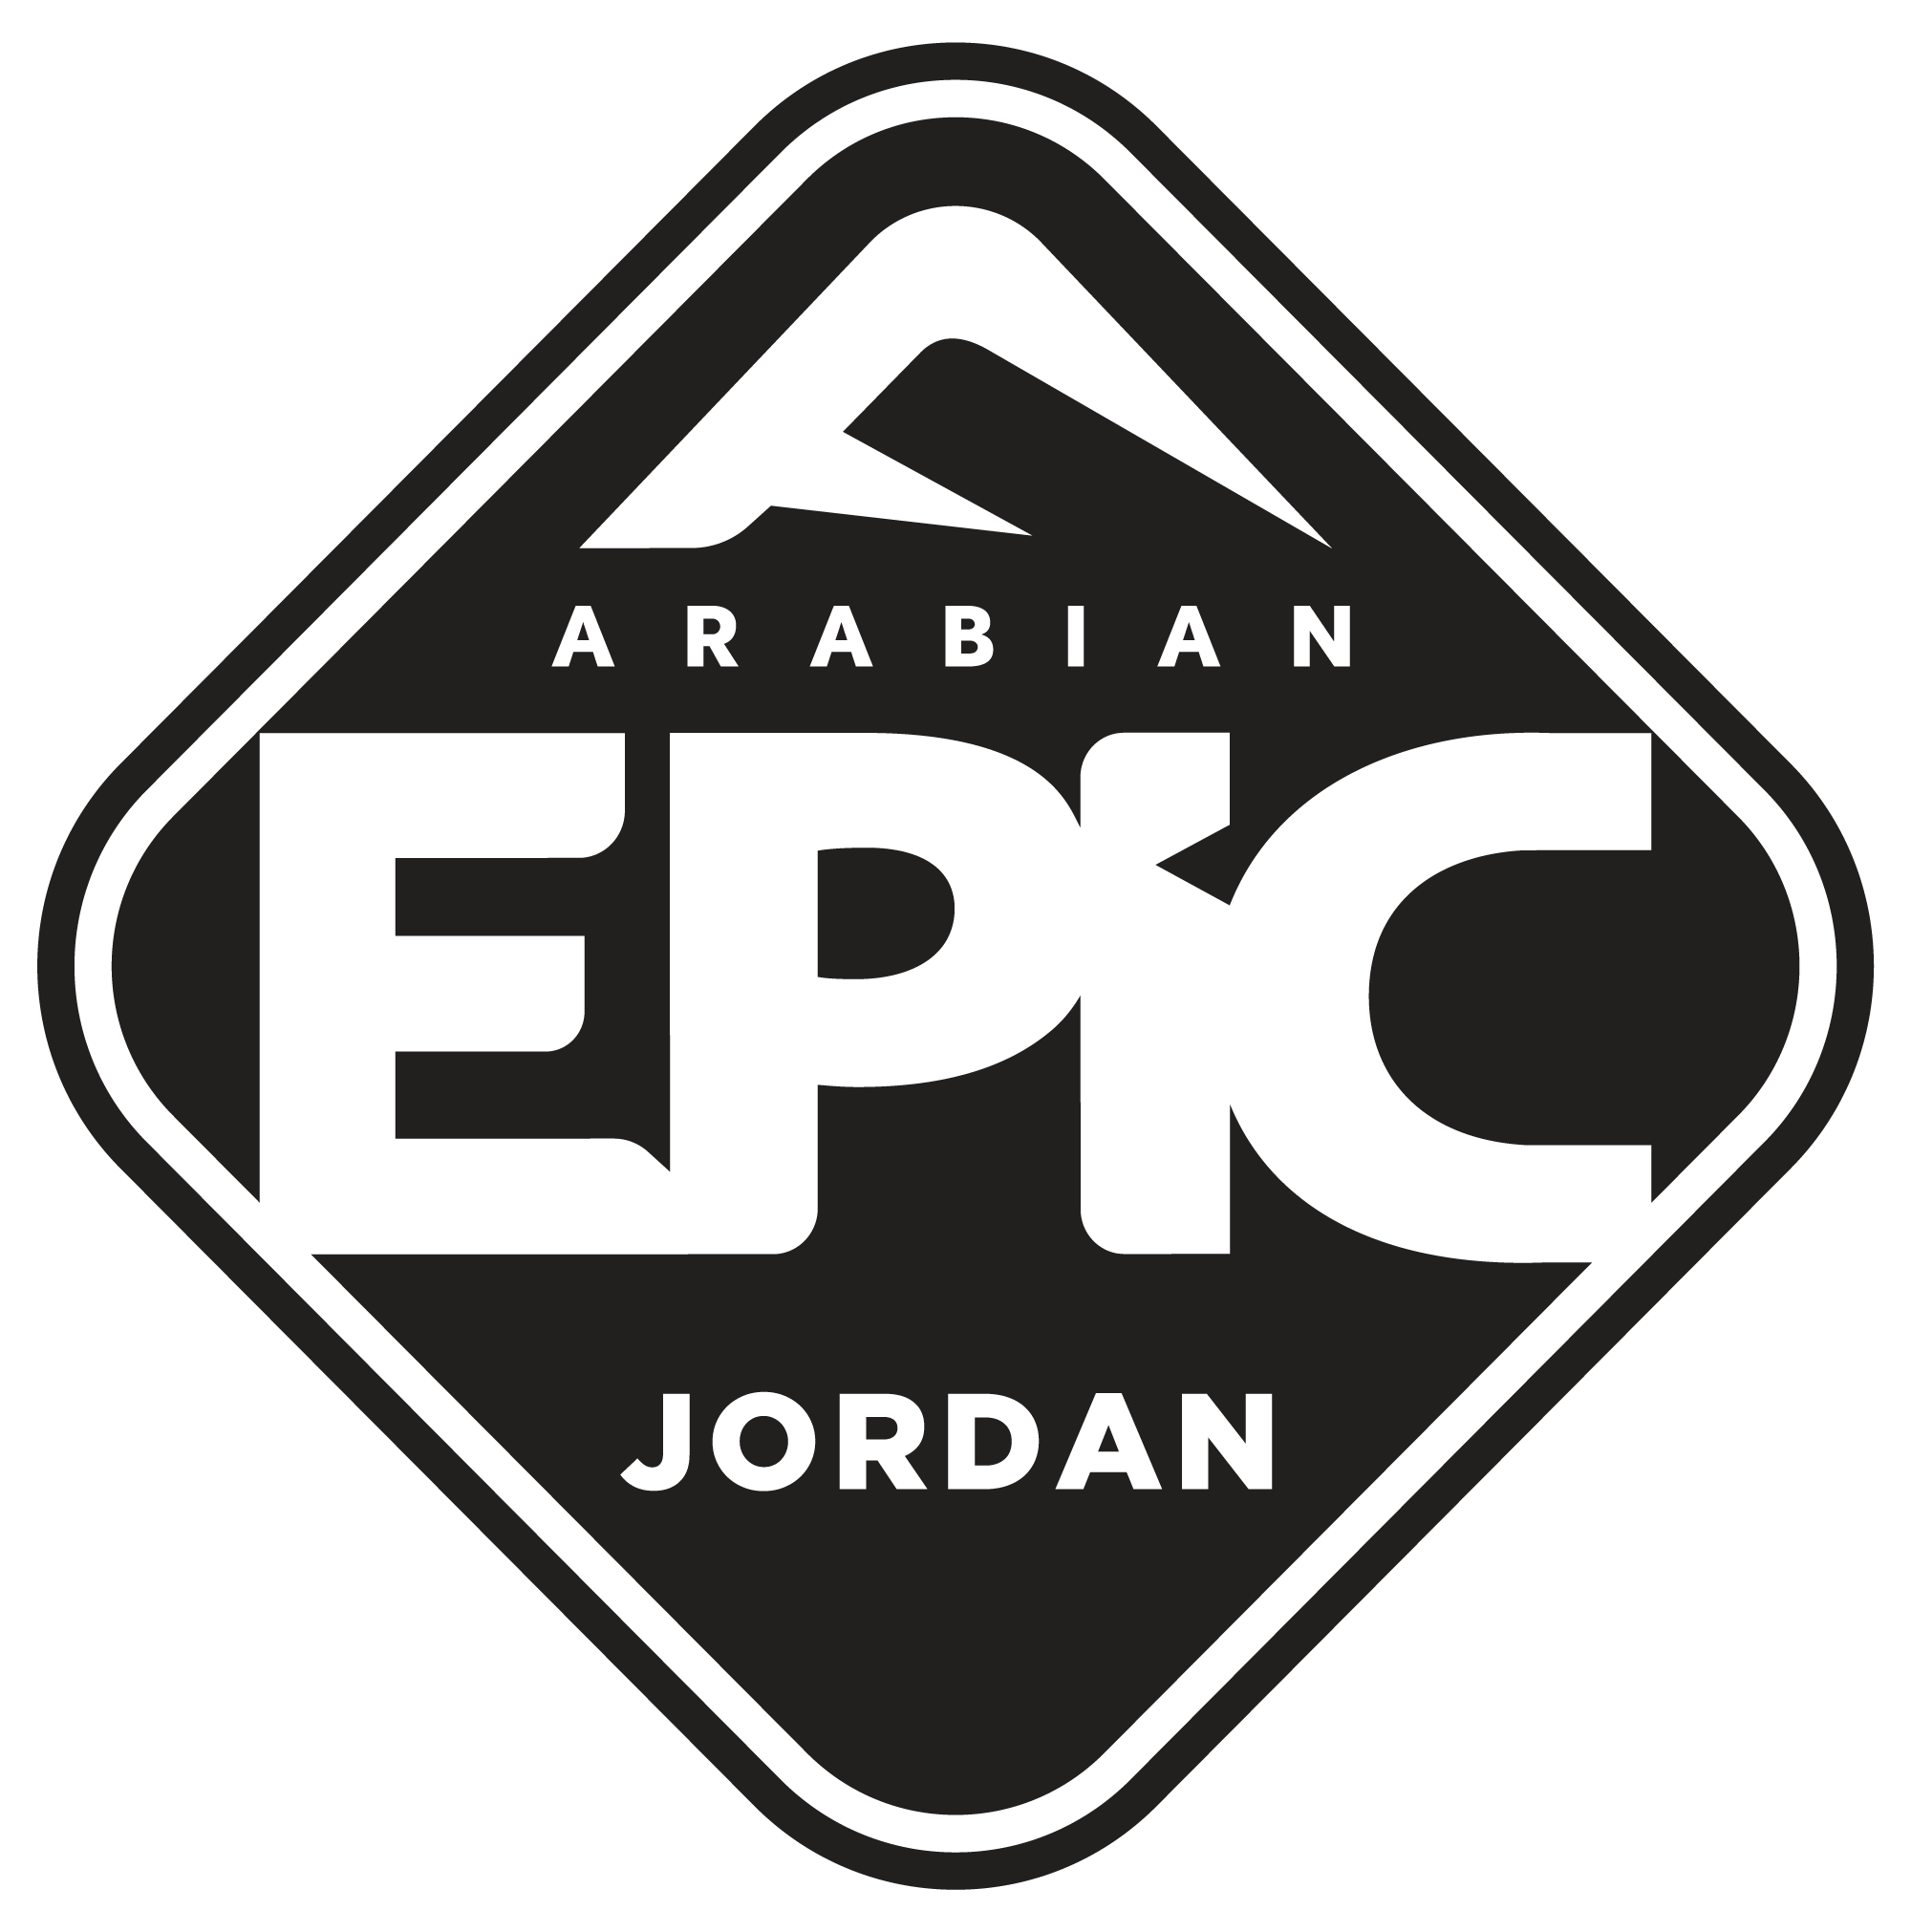 Epic Jordan Logo - The Arabian Epic Series Stage listed in StageRaces.com